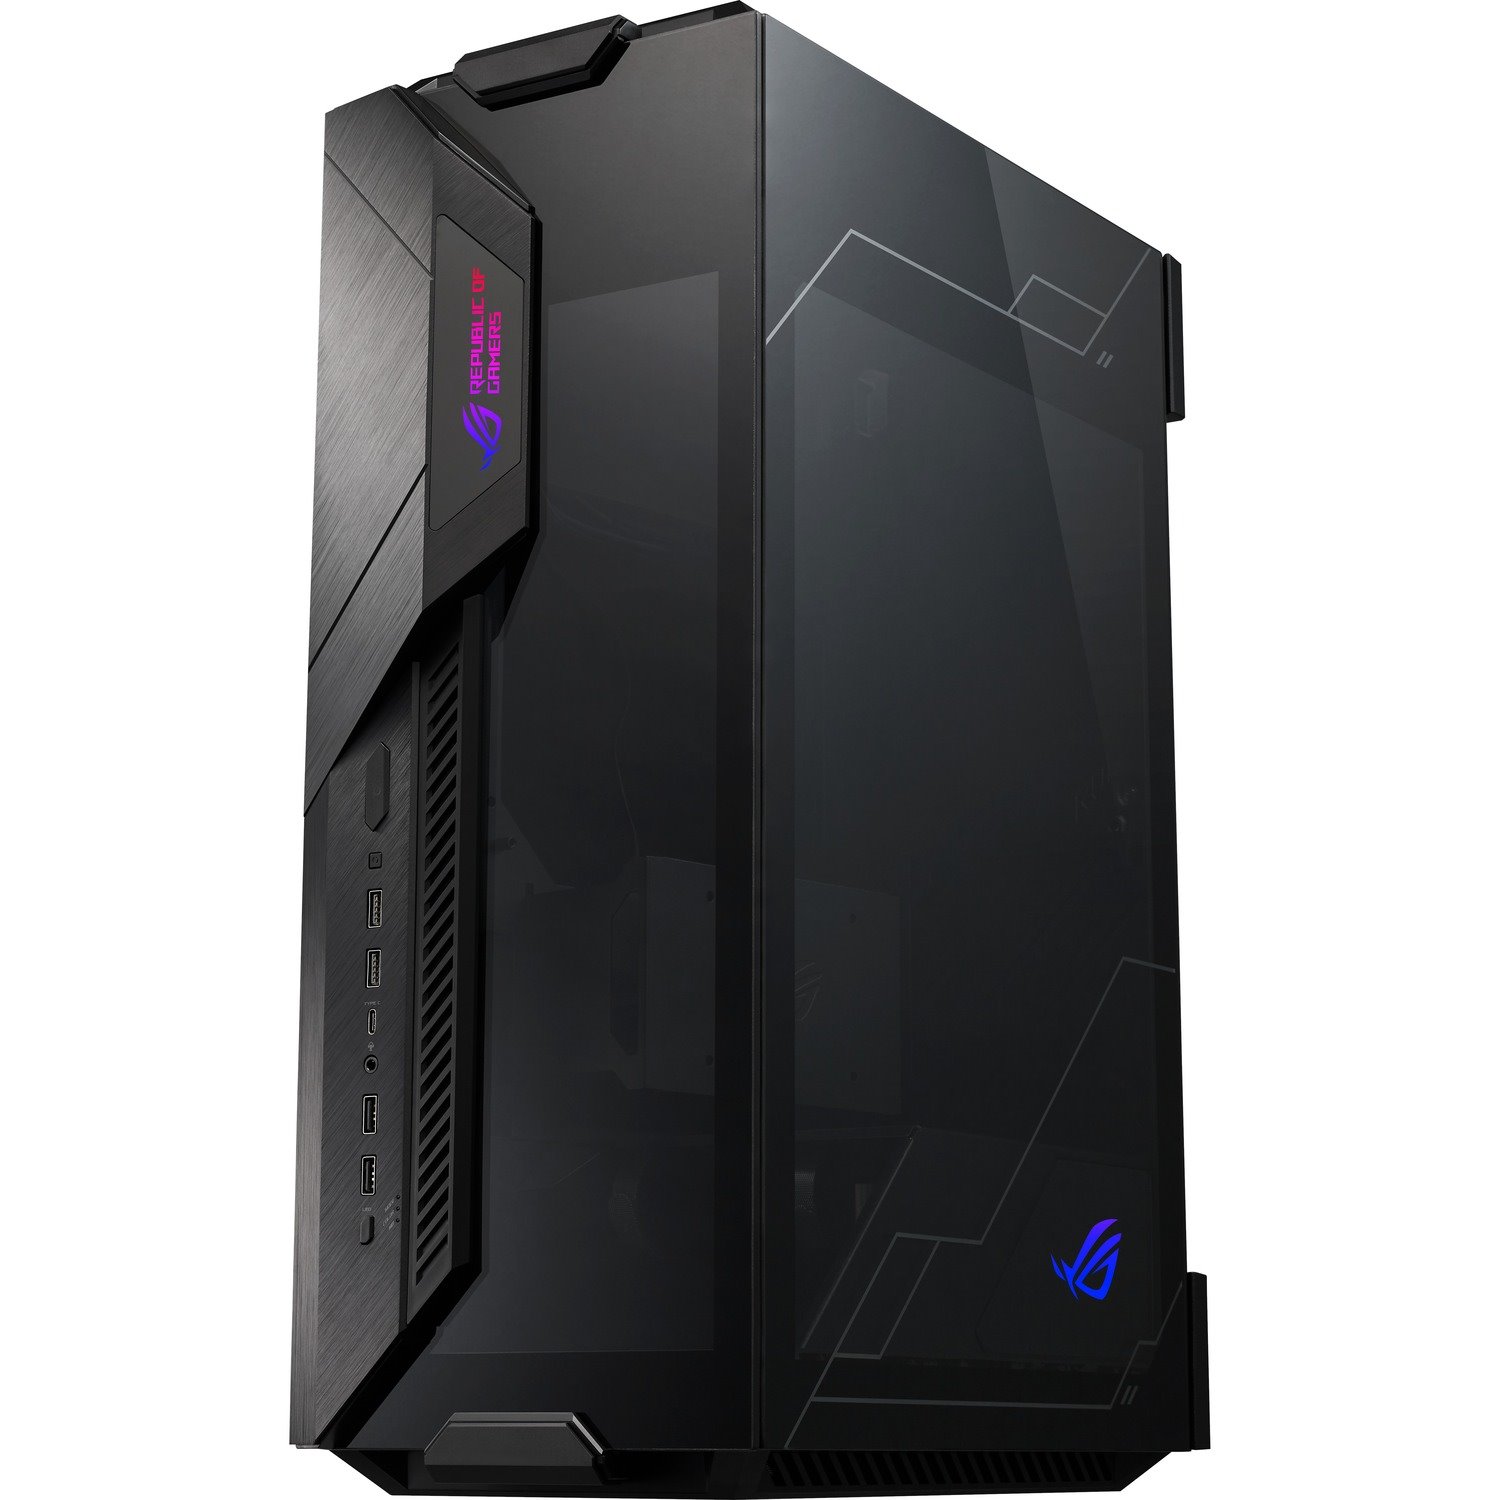 Asus ROG Z11 Computer Case - Mini ITX, Mini DTX Motherboard Supported - Mini-tower - Aluminium, Tempered Glass - Black